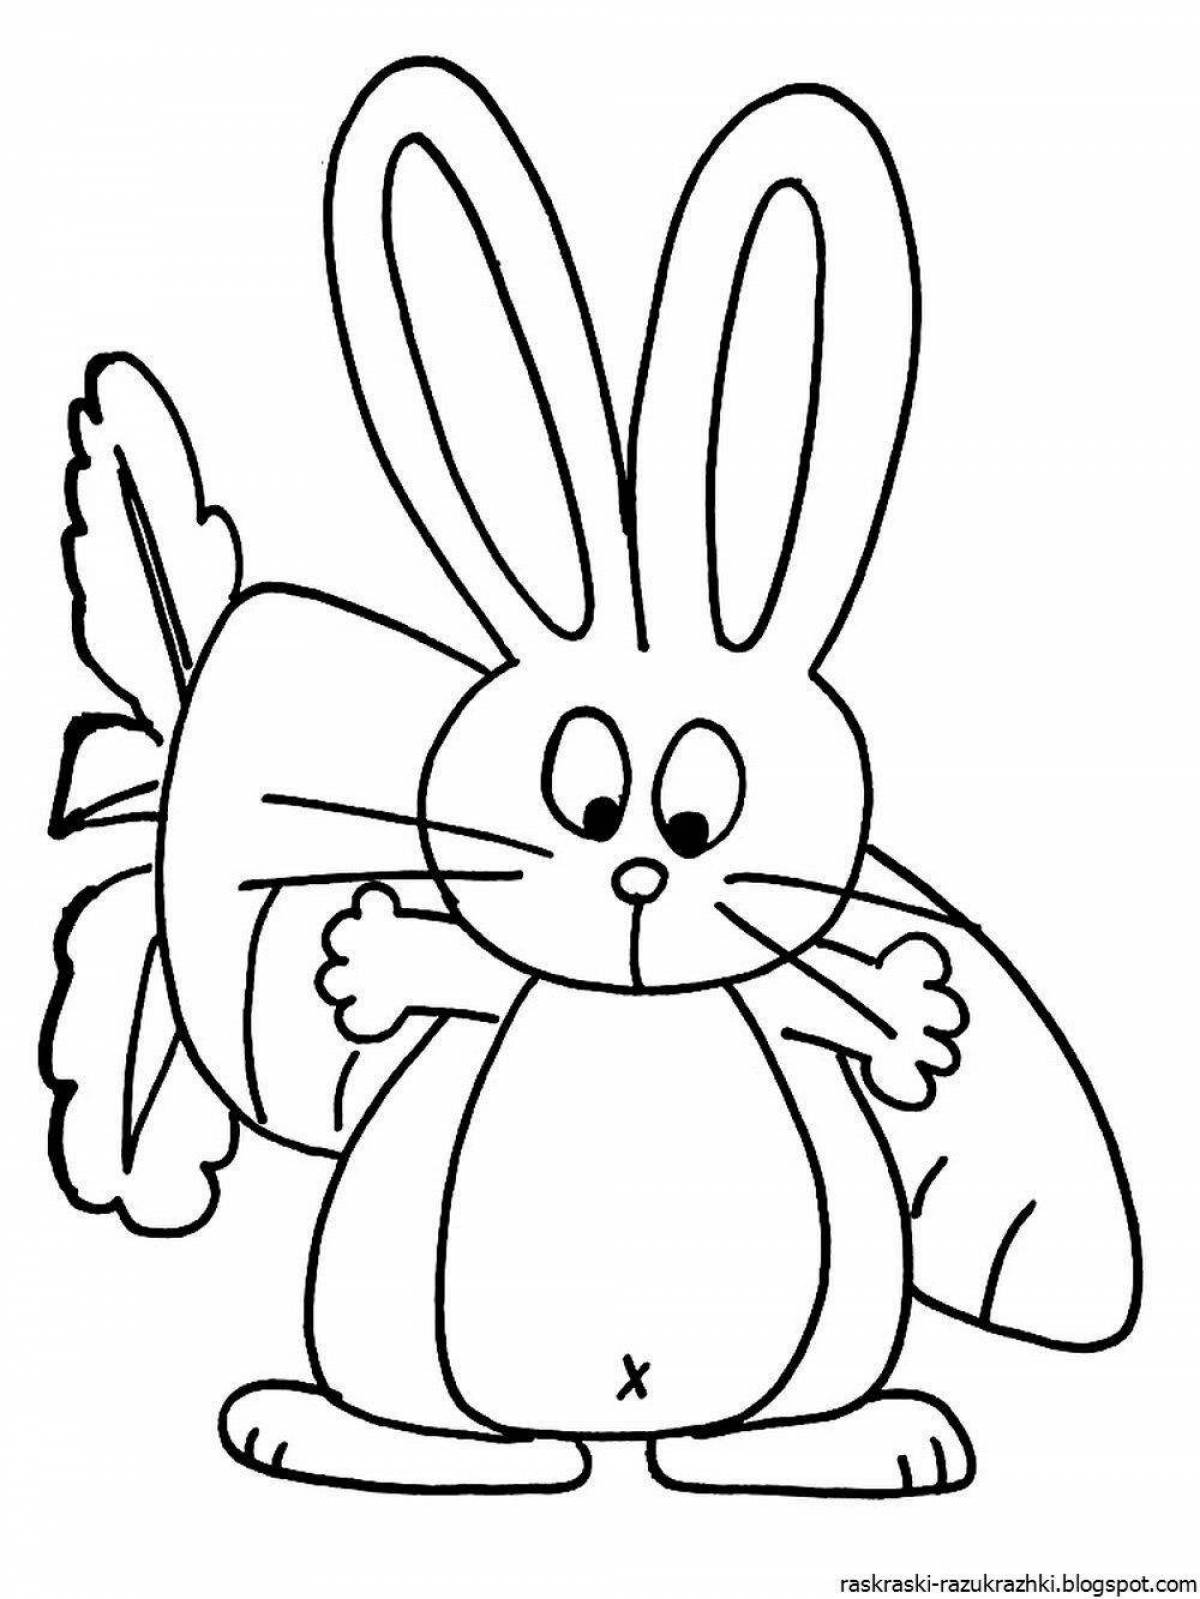 Coloring page playful rabbit with a carrot